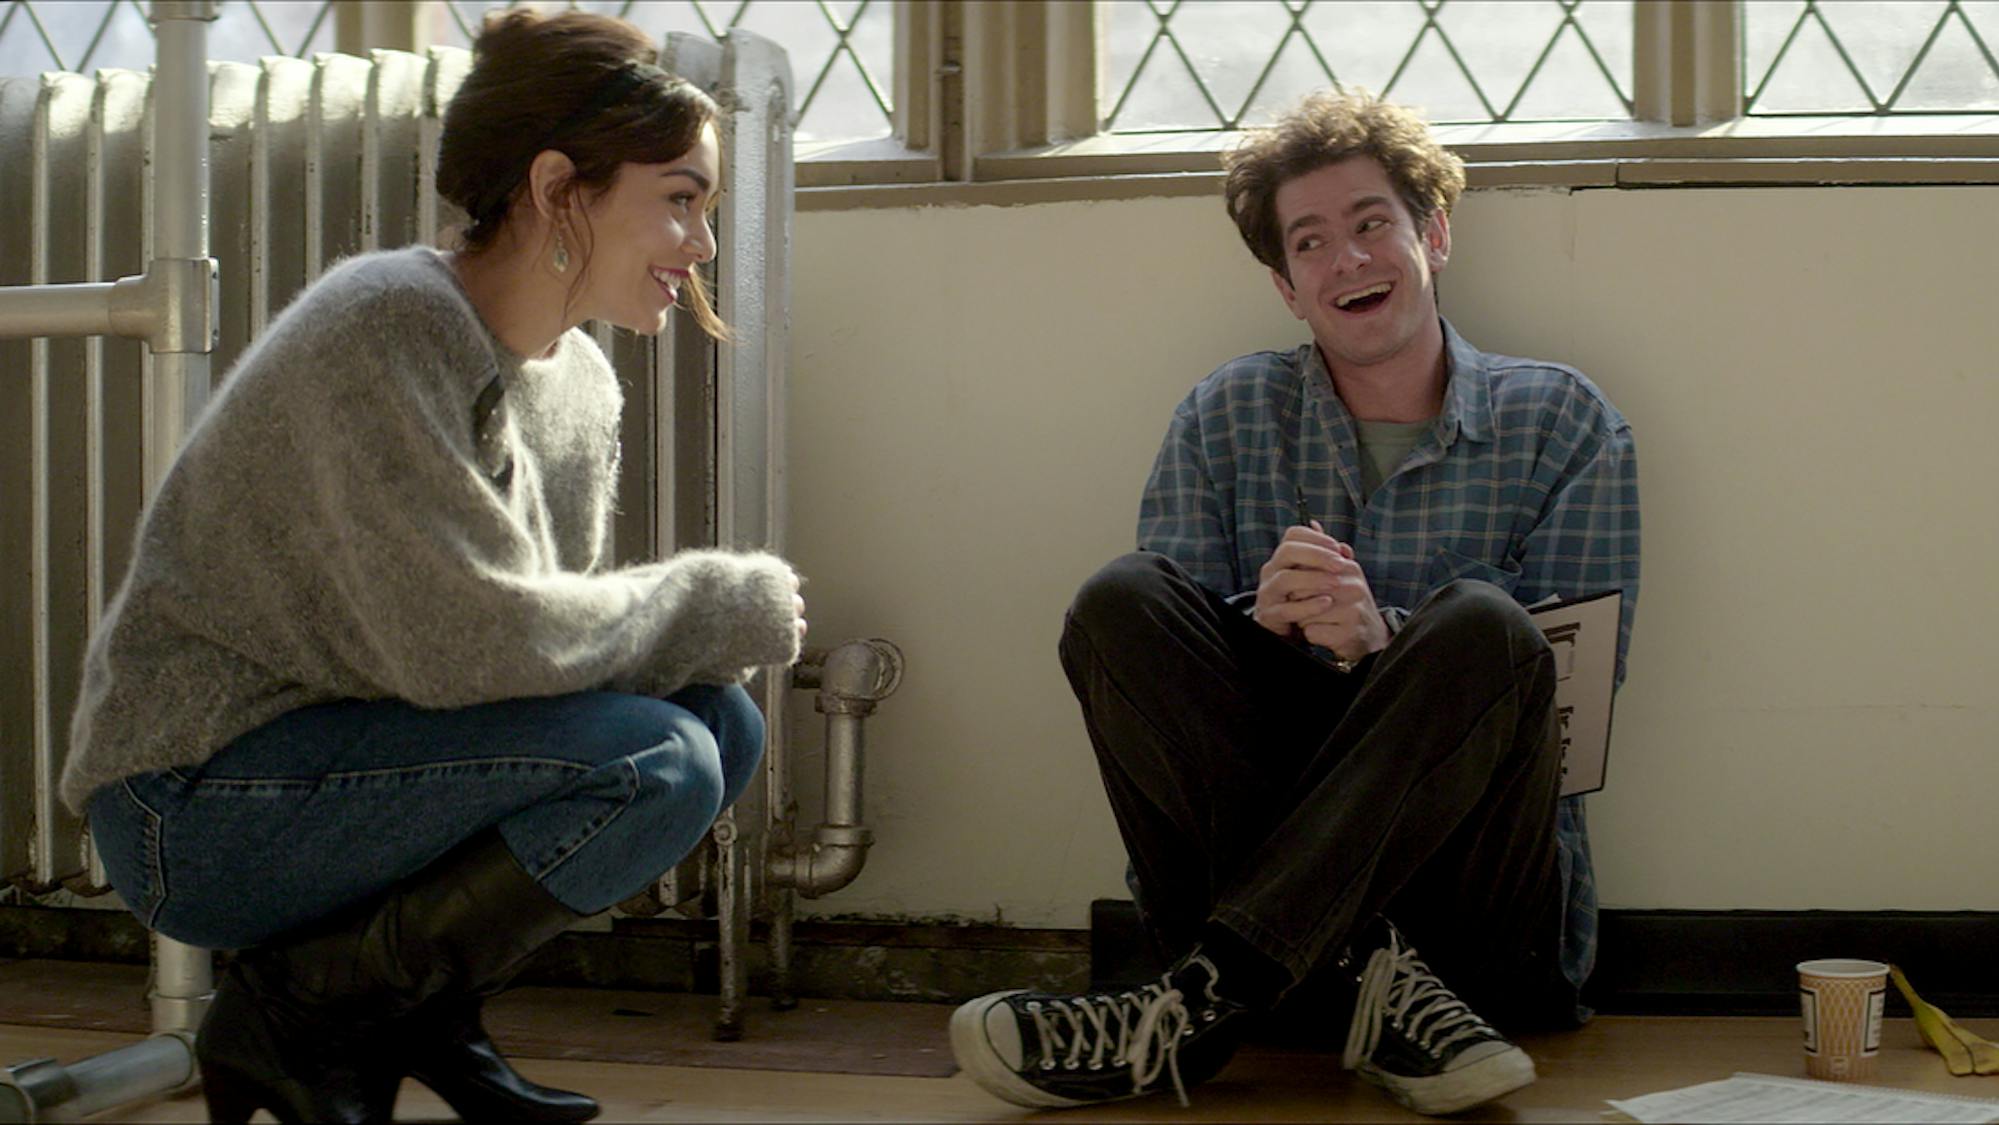 Vanessa Hudgens and Andrew Garfield as Jonathan Larson sit in a rehearsal space. Hudgens wears jeans and a light colored sweater. Garfield wears converse, dark pants, and a checkered shirt. Light streams in from the windows behind them.